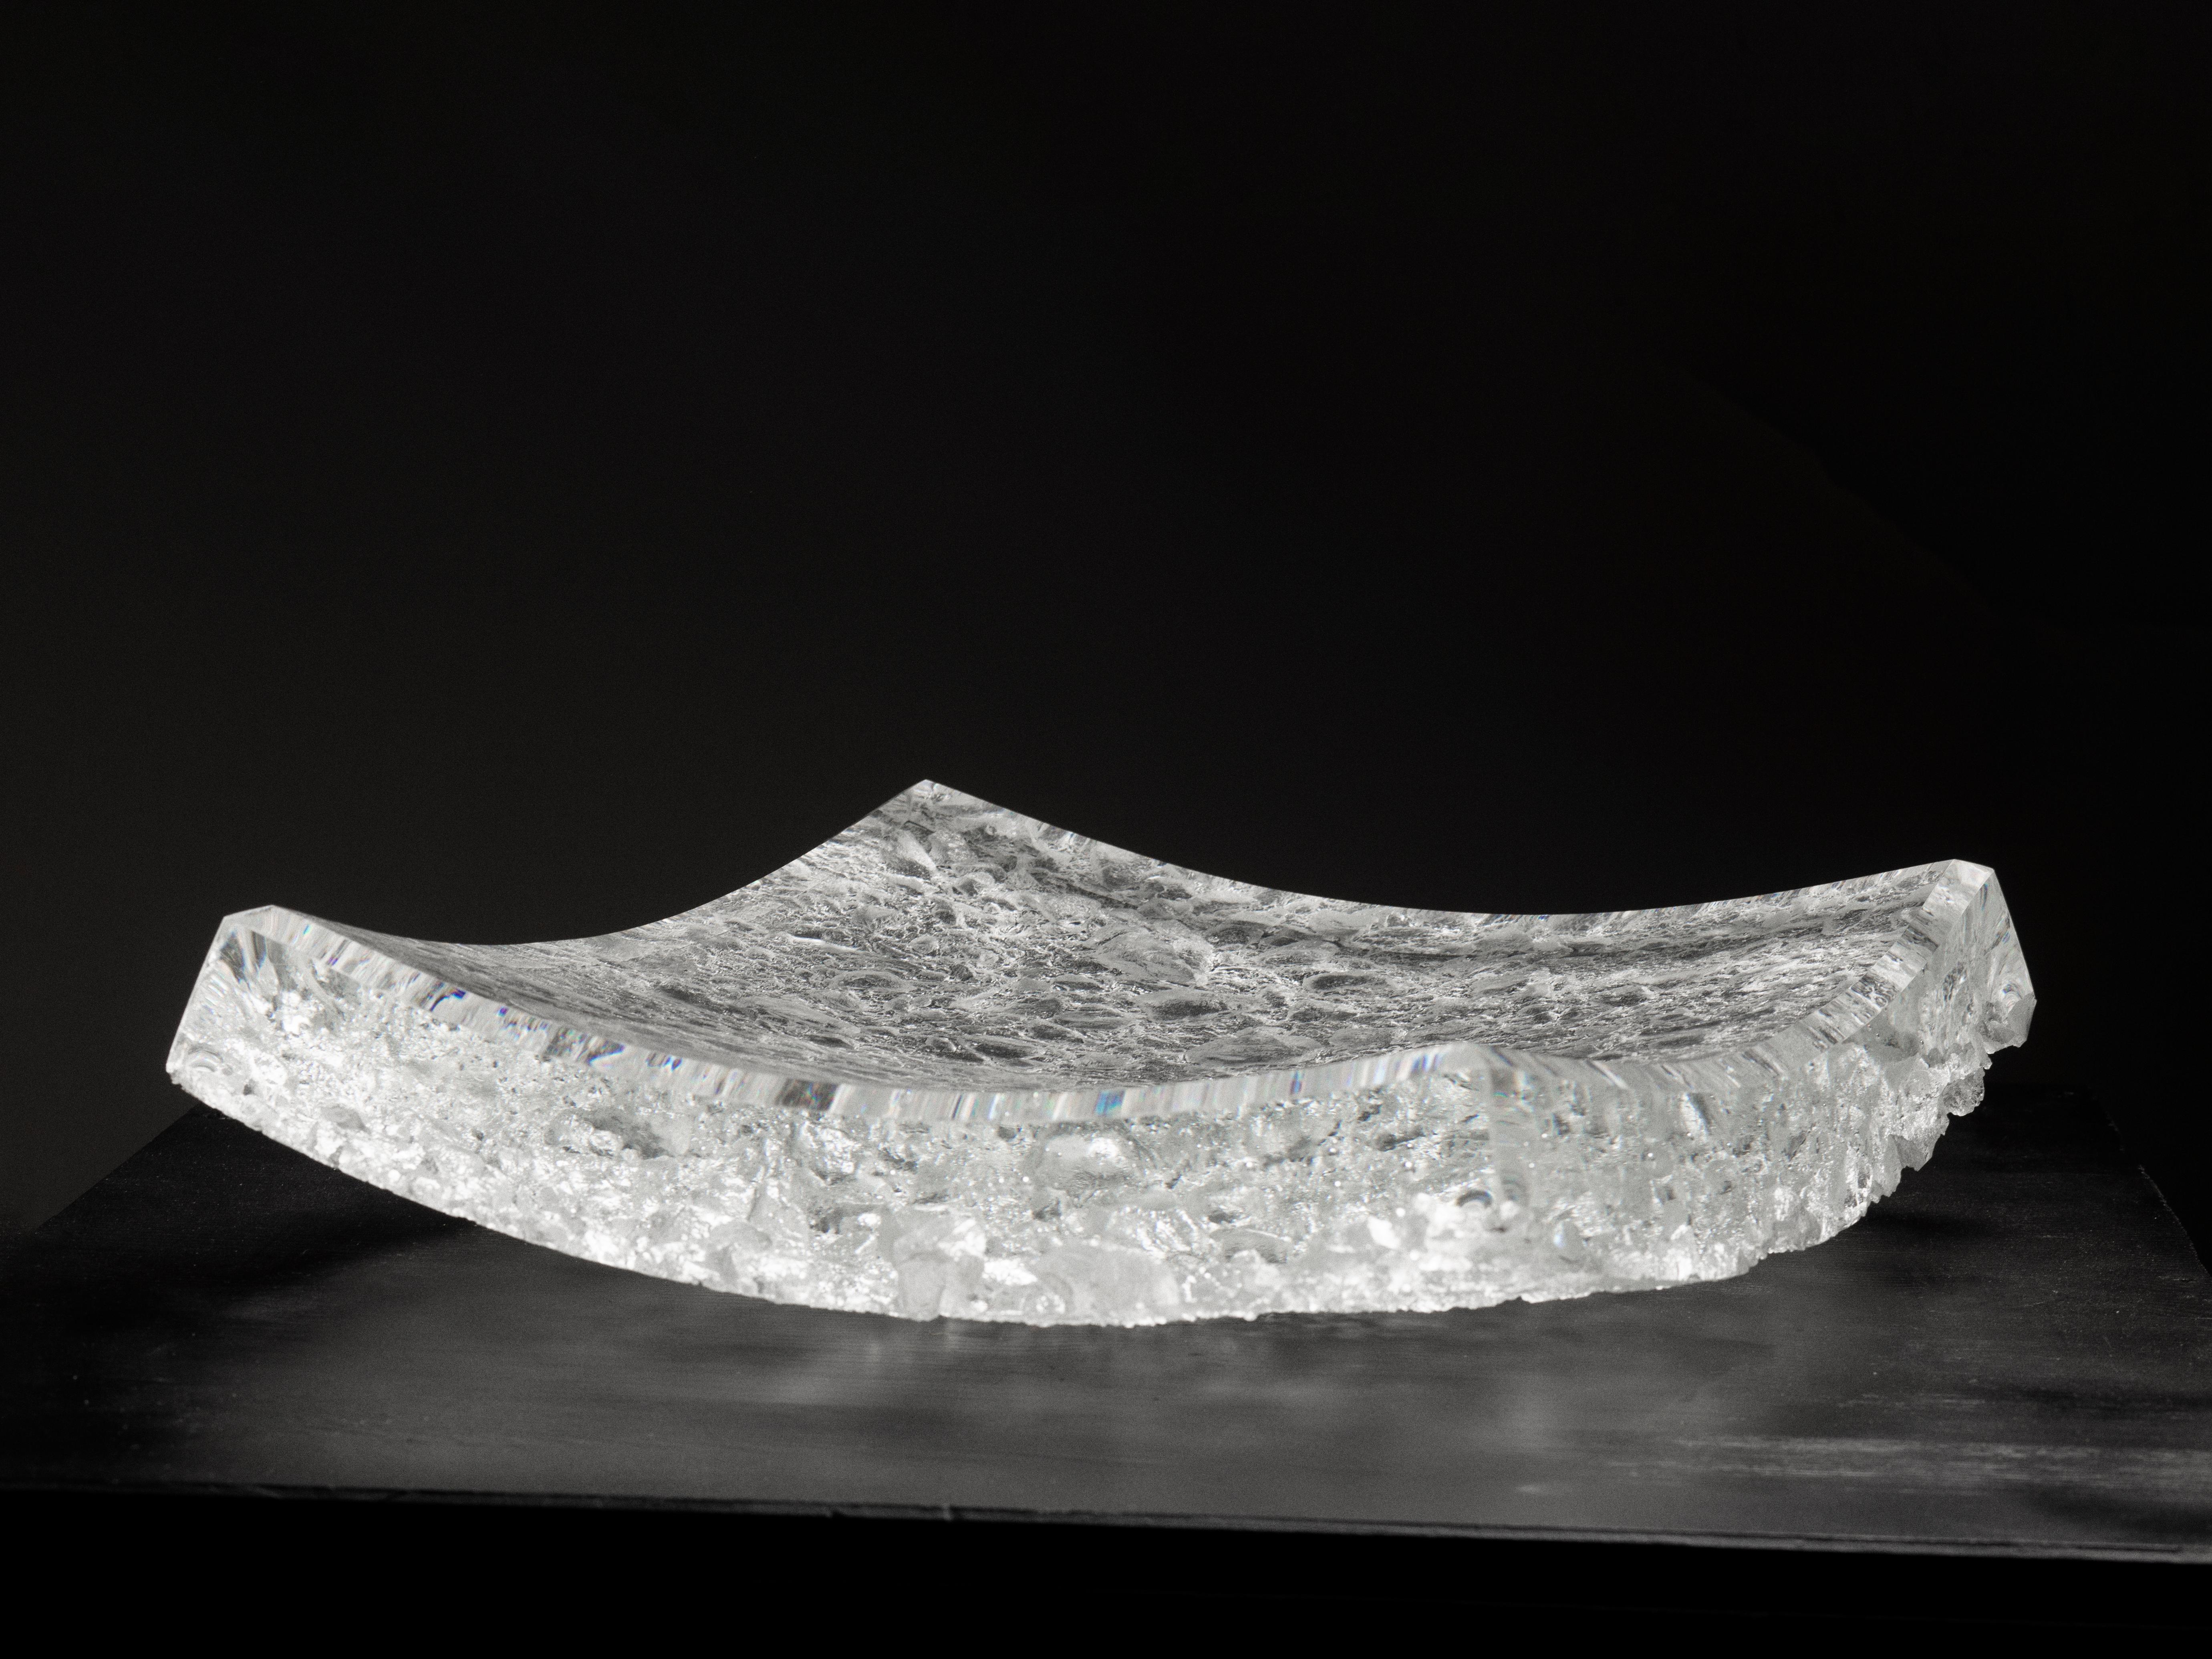 Yugen Square Plate by Matthieu Gicquel
Dimensions: D 39 x W 39 x H 5 cm.
Materials: Optical glass.
Weight: 19 kg.

Each piece is numbered. Please contact us.

Praise for the moment
Light shines through the glass. Details are revealed one by one: